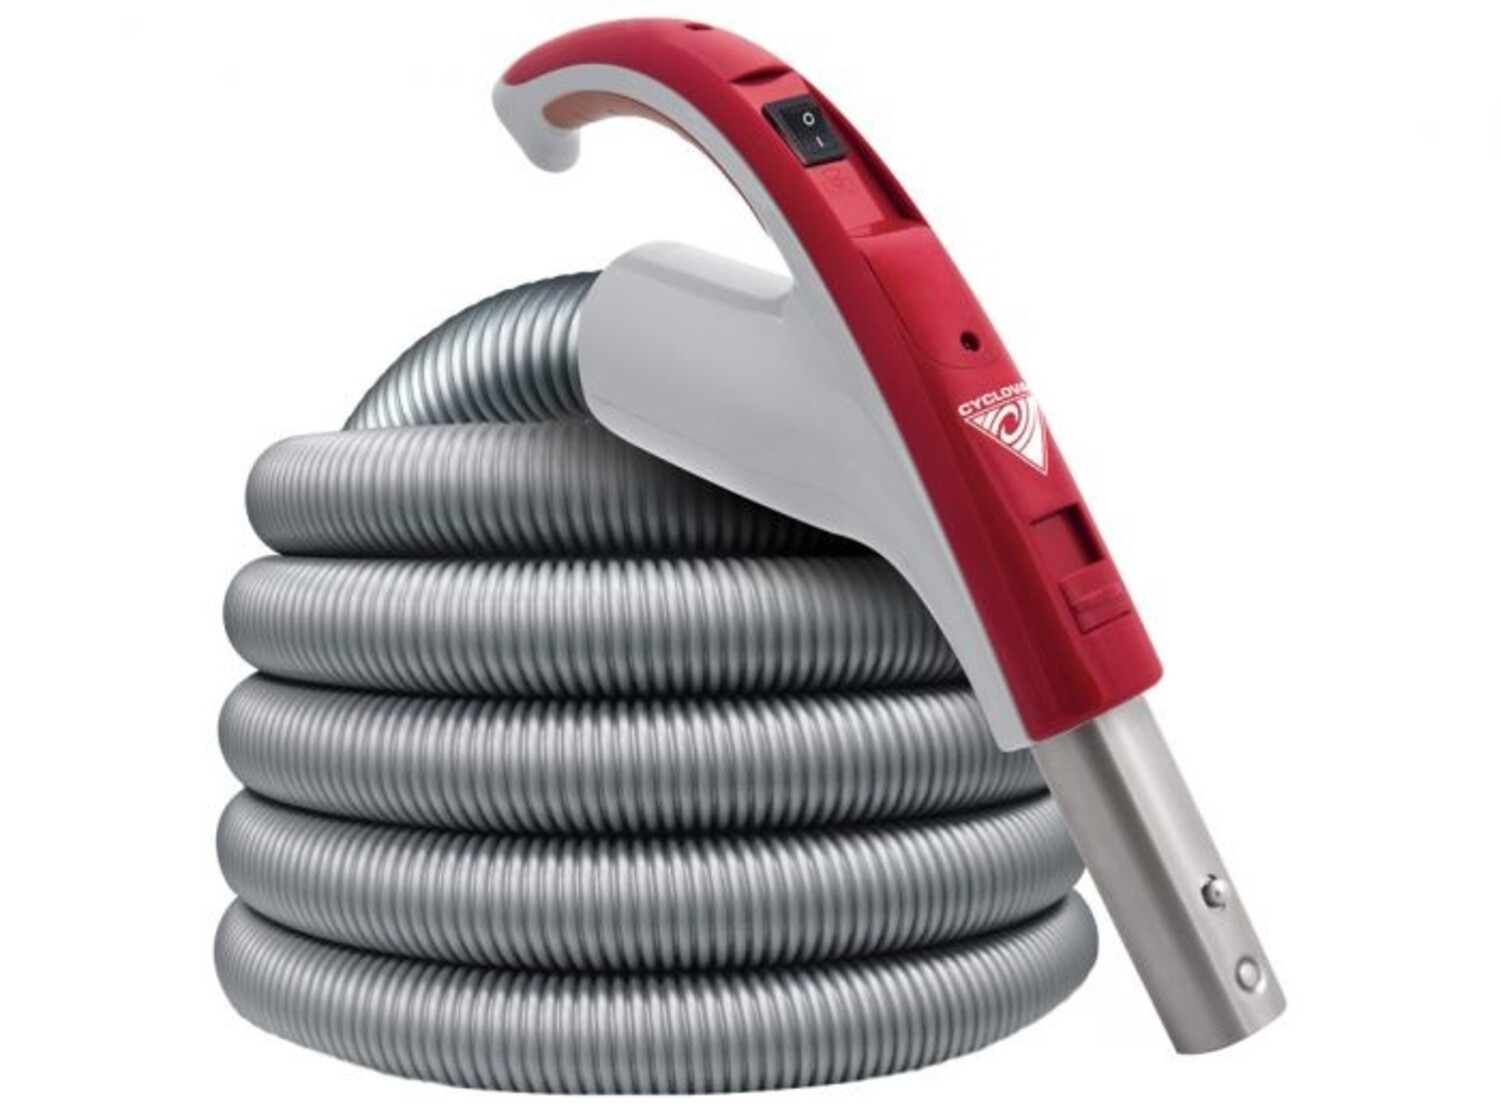 Cyclovac Low Voltage Hose for Efficient Cleaning